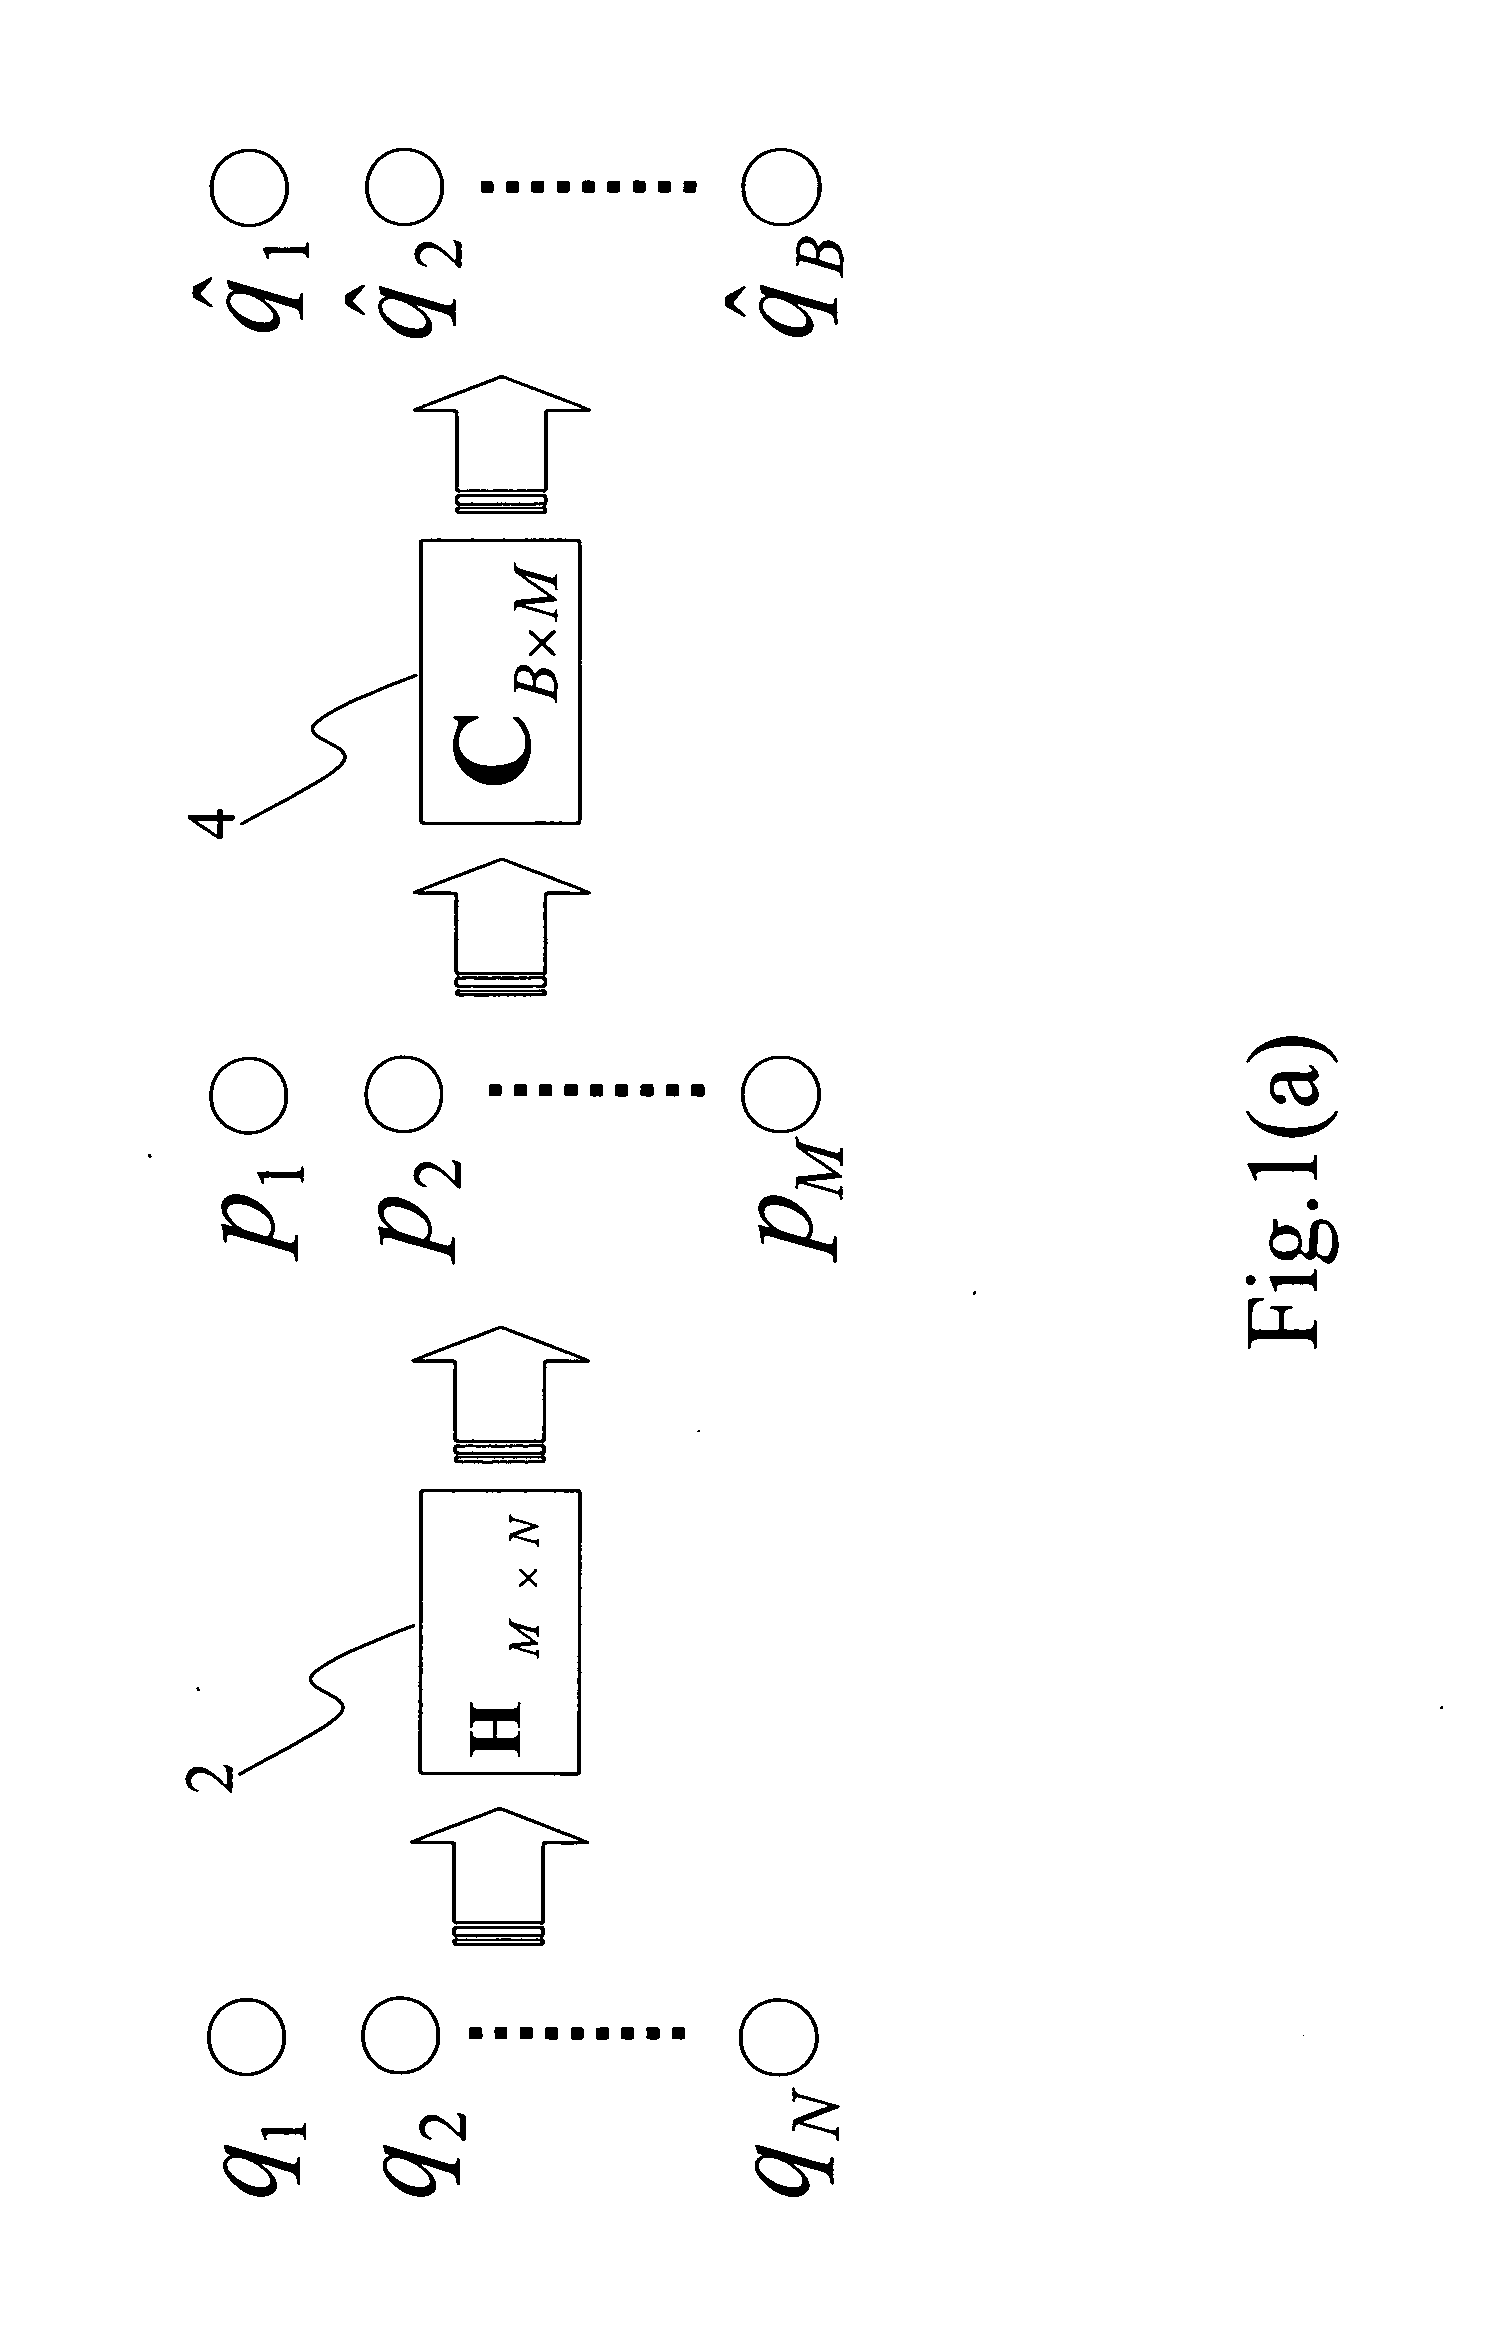 System and method for visualizing sound source energy distribution